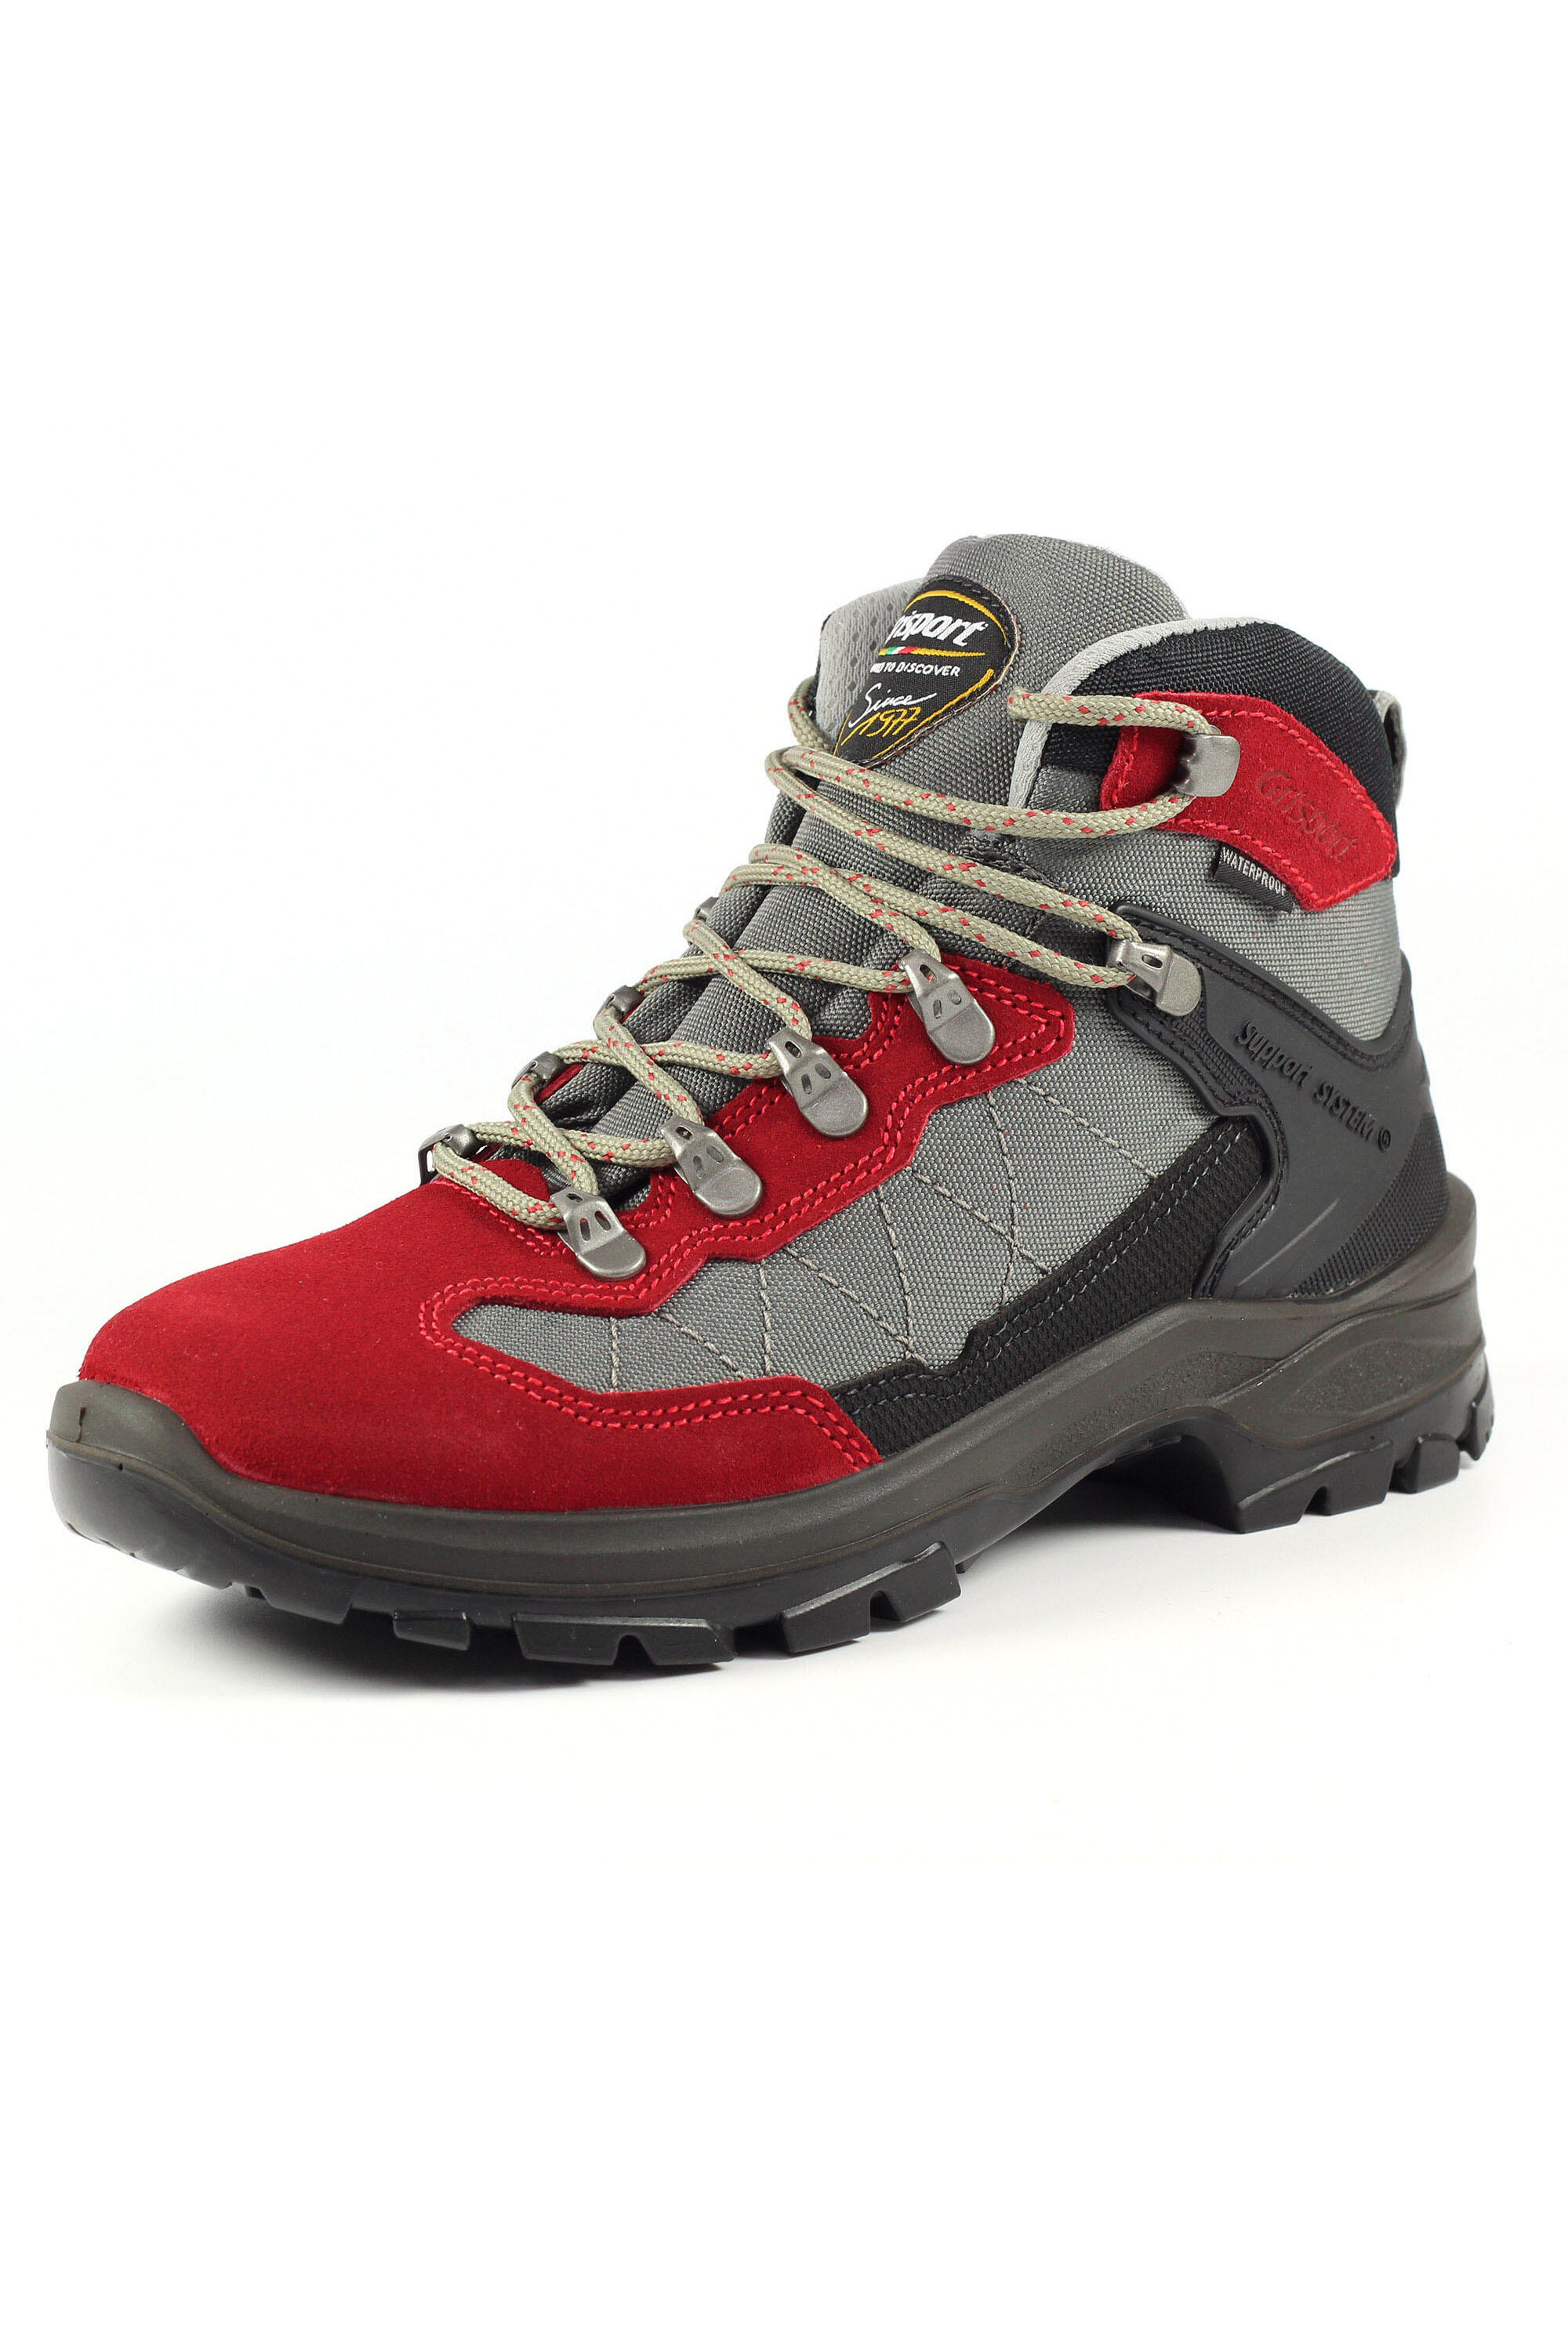 Lady Excalibur Red Walking Boot 4/5